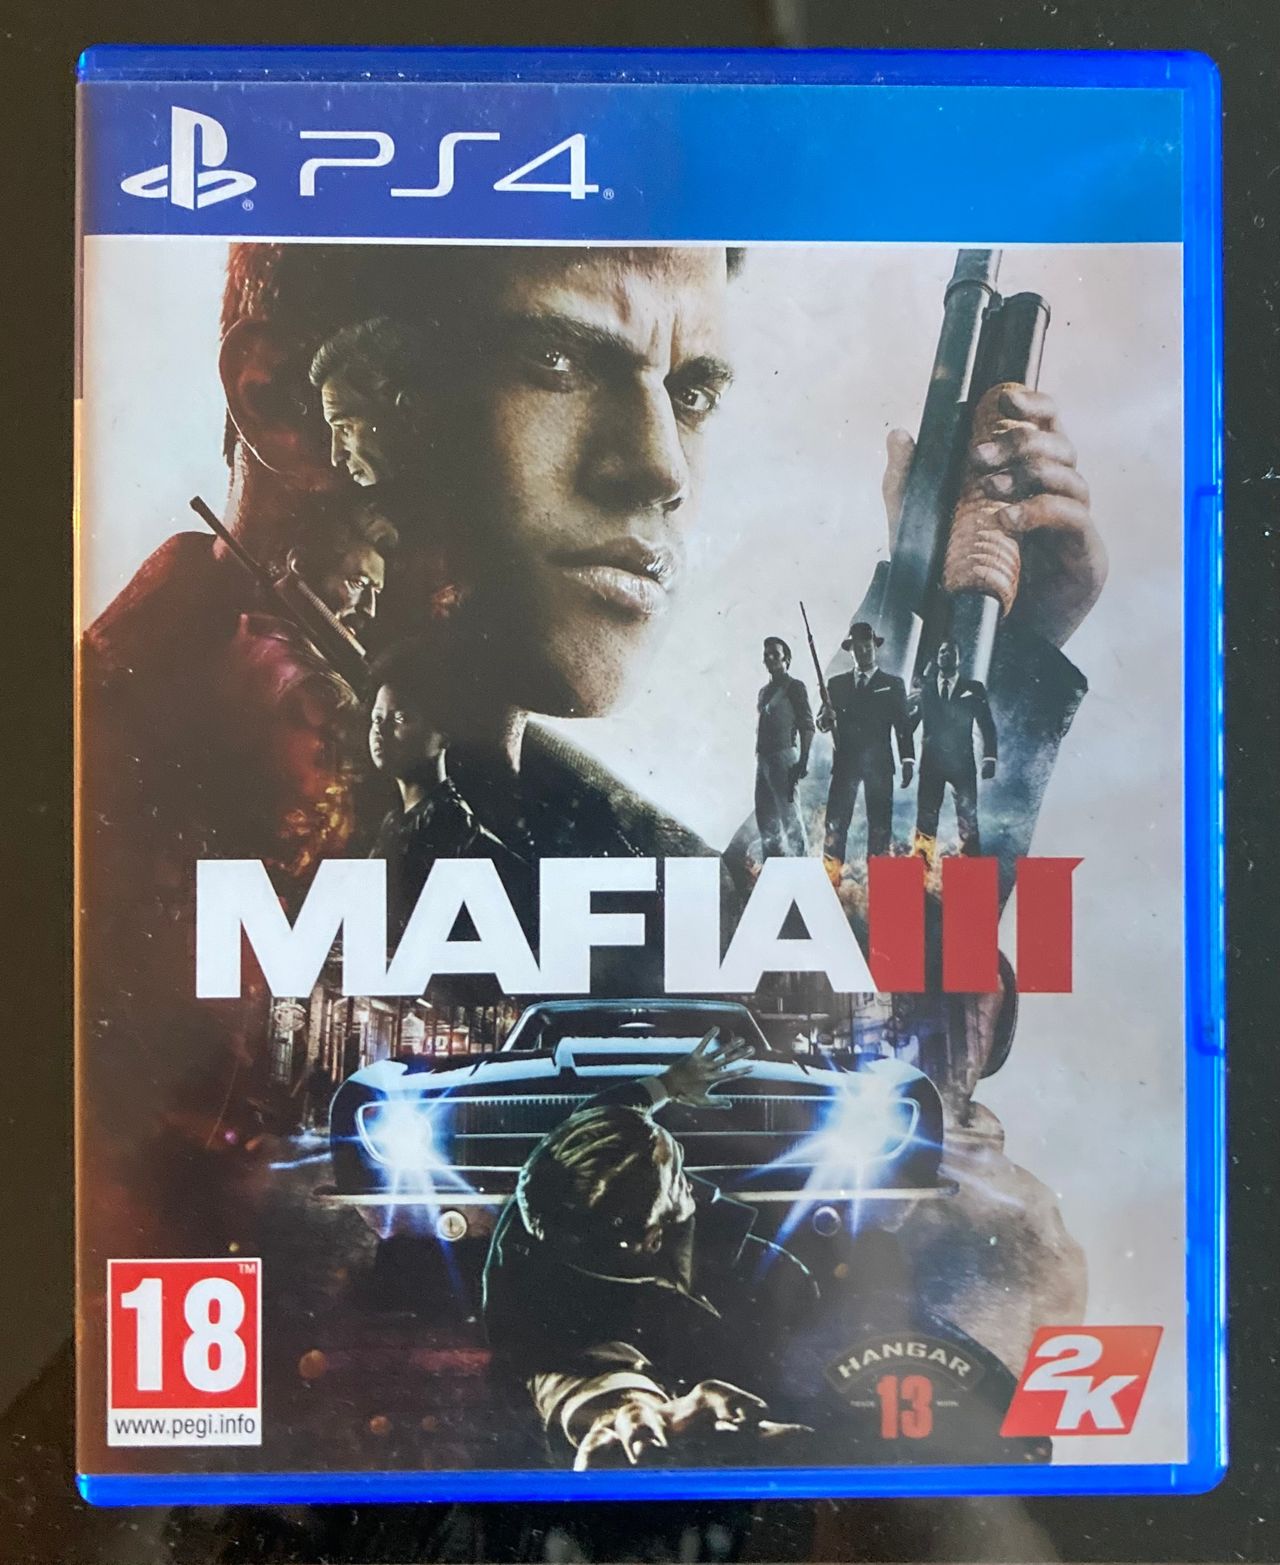 Mafia III 3 Playstation 4 PS4 Good Condition F PS5 Compatible